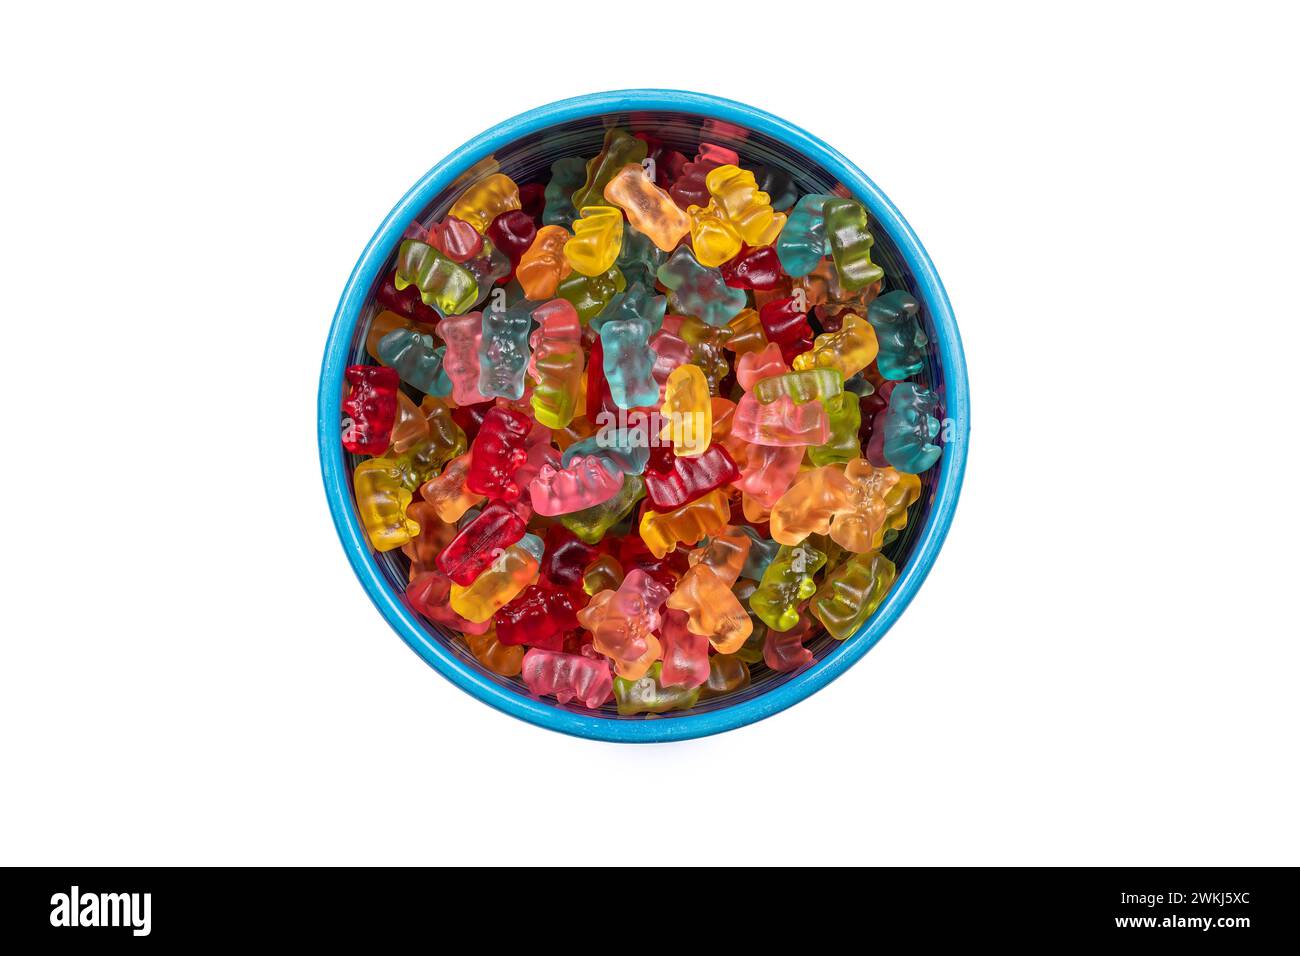 Colorful Gummibears Assortment in Vibrant Candy Bowl on White Background, Top View.. Stock Photo